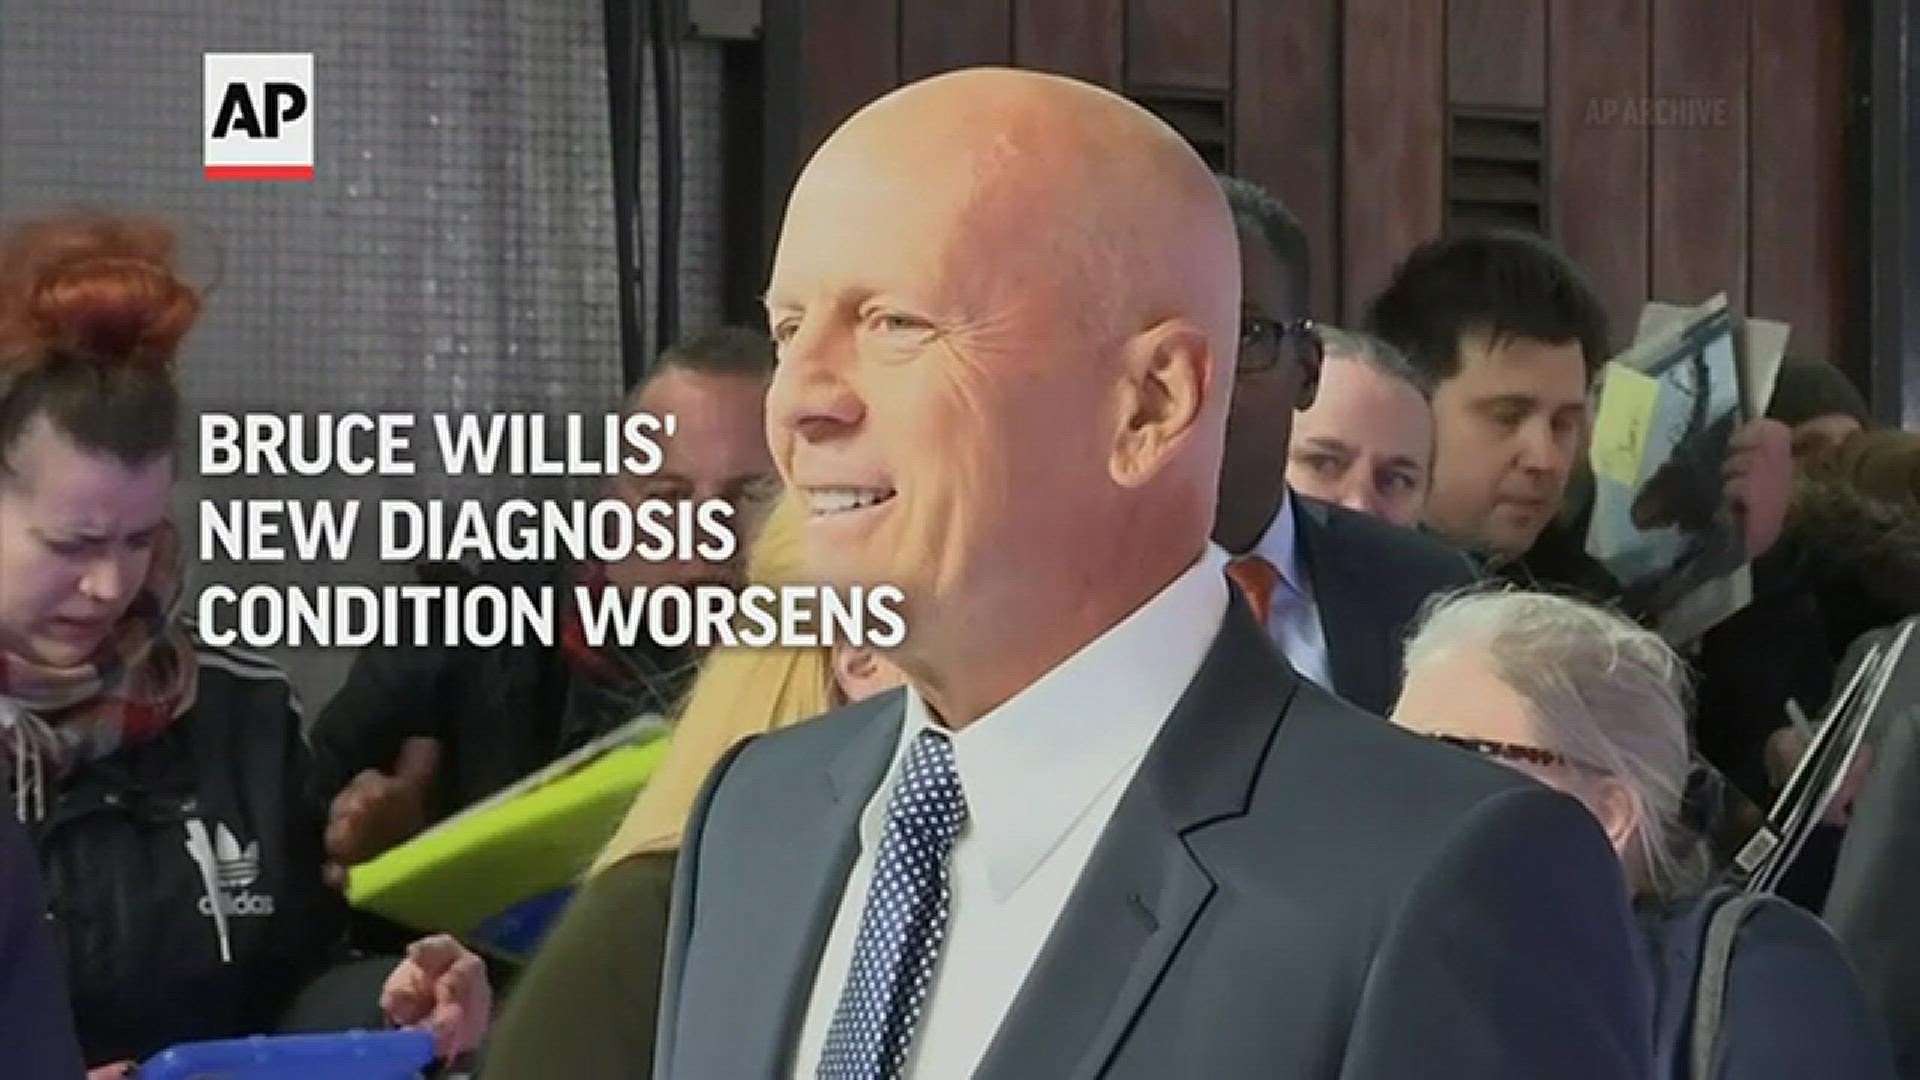 Nearly a year after Bruce Willis’ family announced that he would step away from acting after being diagnosed with aphasia, his “condition has progressed."